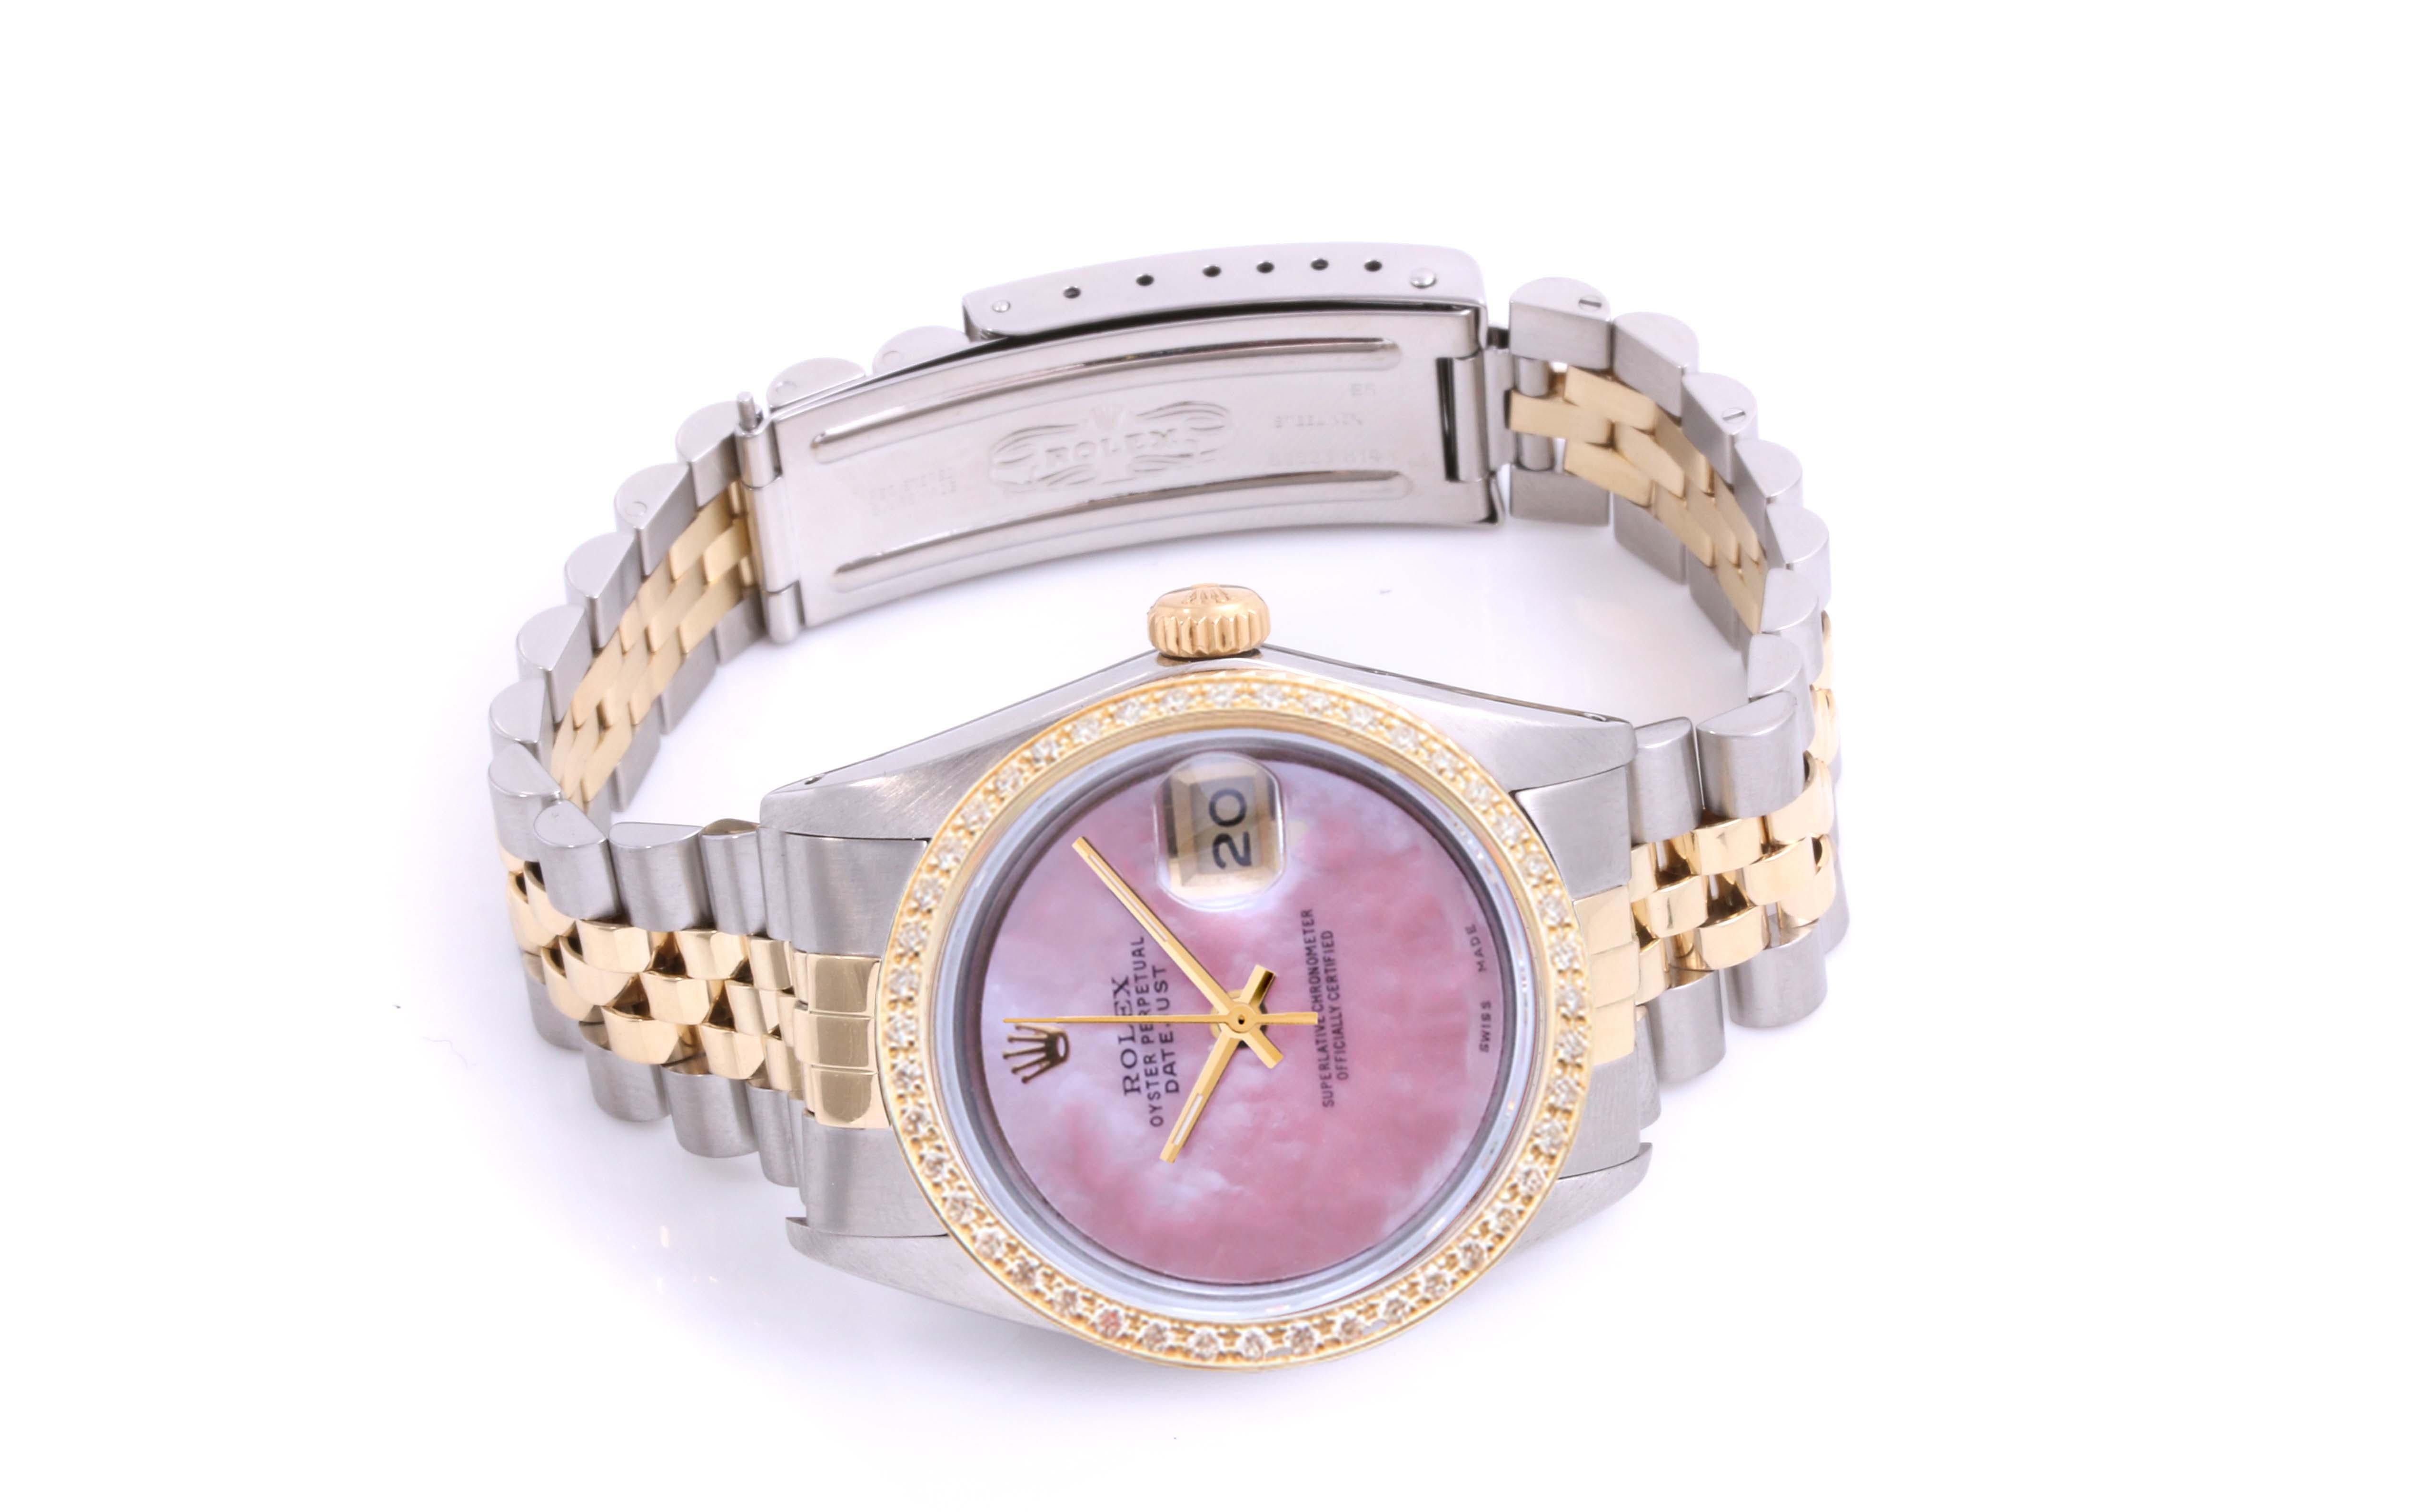 (Watch Description) 
Brand - Rolex
Gender - Unisex 
Model - 16013 Datejust
Metals - Yellow Gold / Stainless steel
Case size - 36mm
Bezel - Yellow Gold Diamond
Crystal - Sapphire
Movement - Automatic Cal.3035
Dial - Refinished Pink MOP
Wrist band -